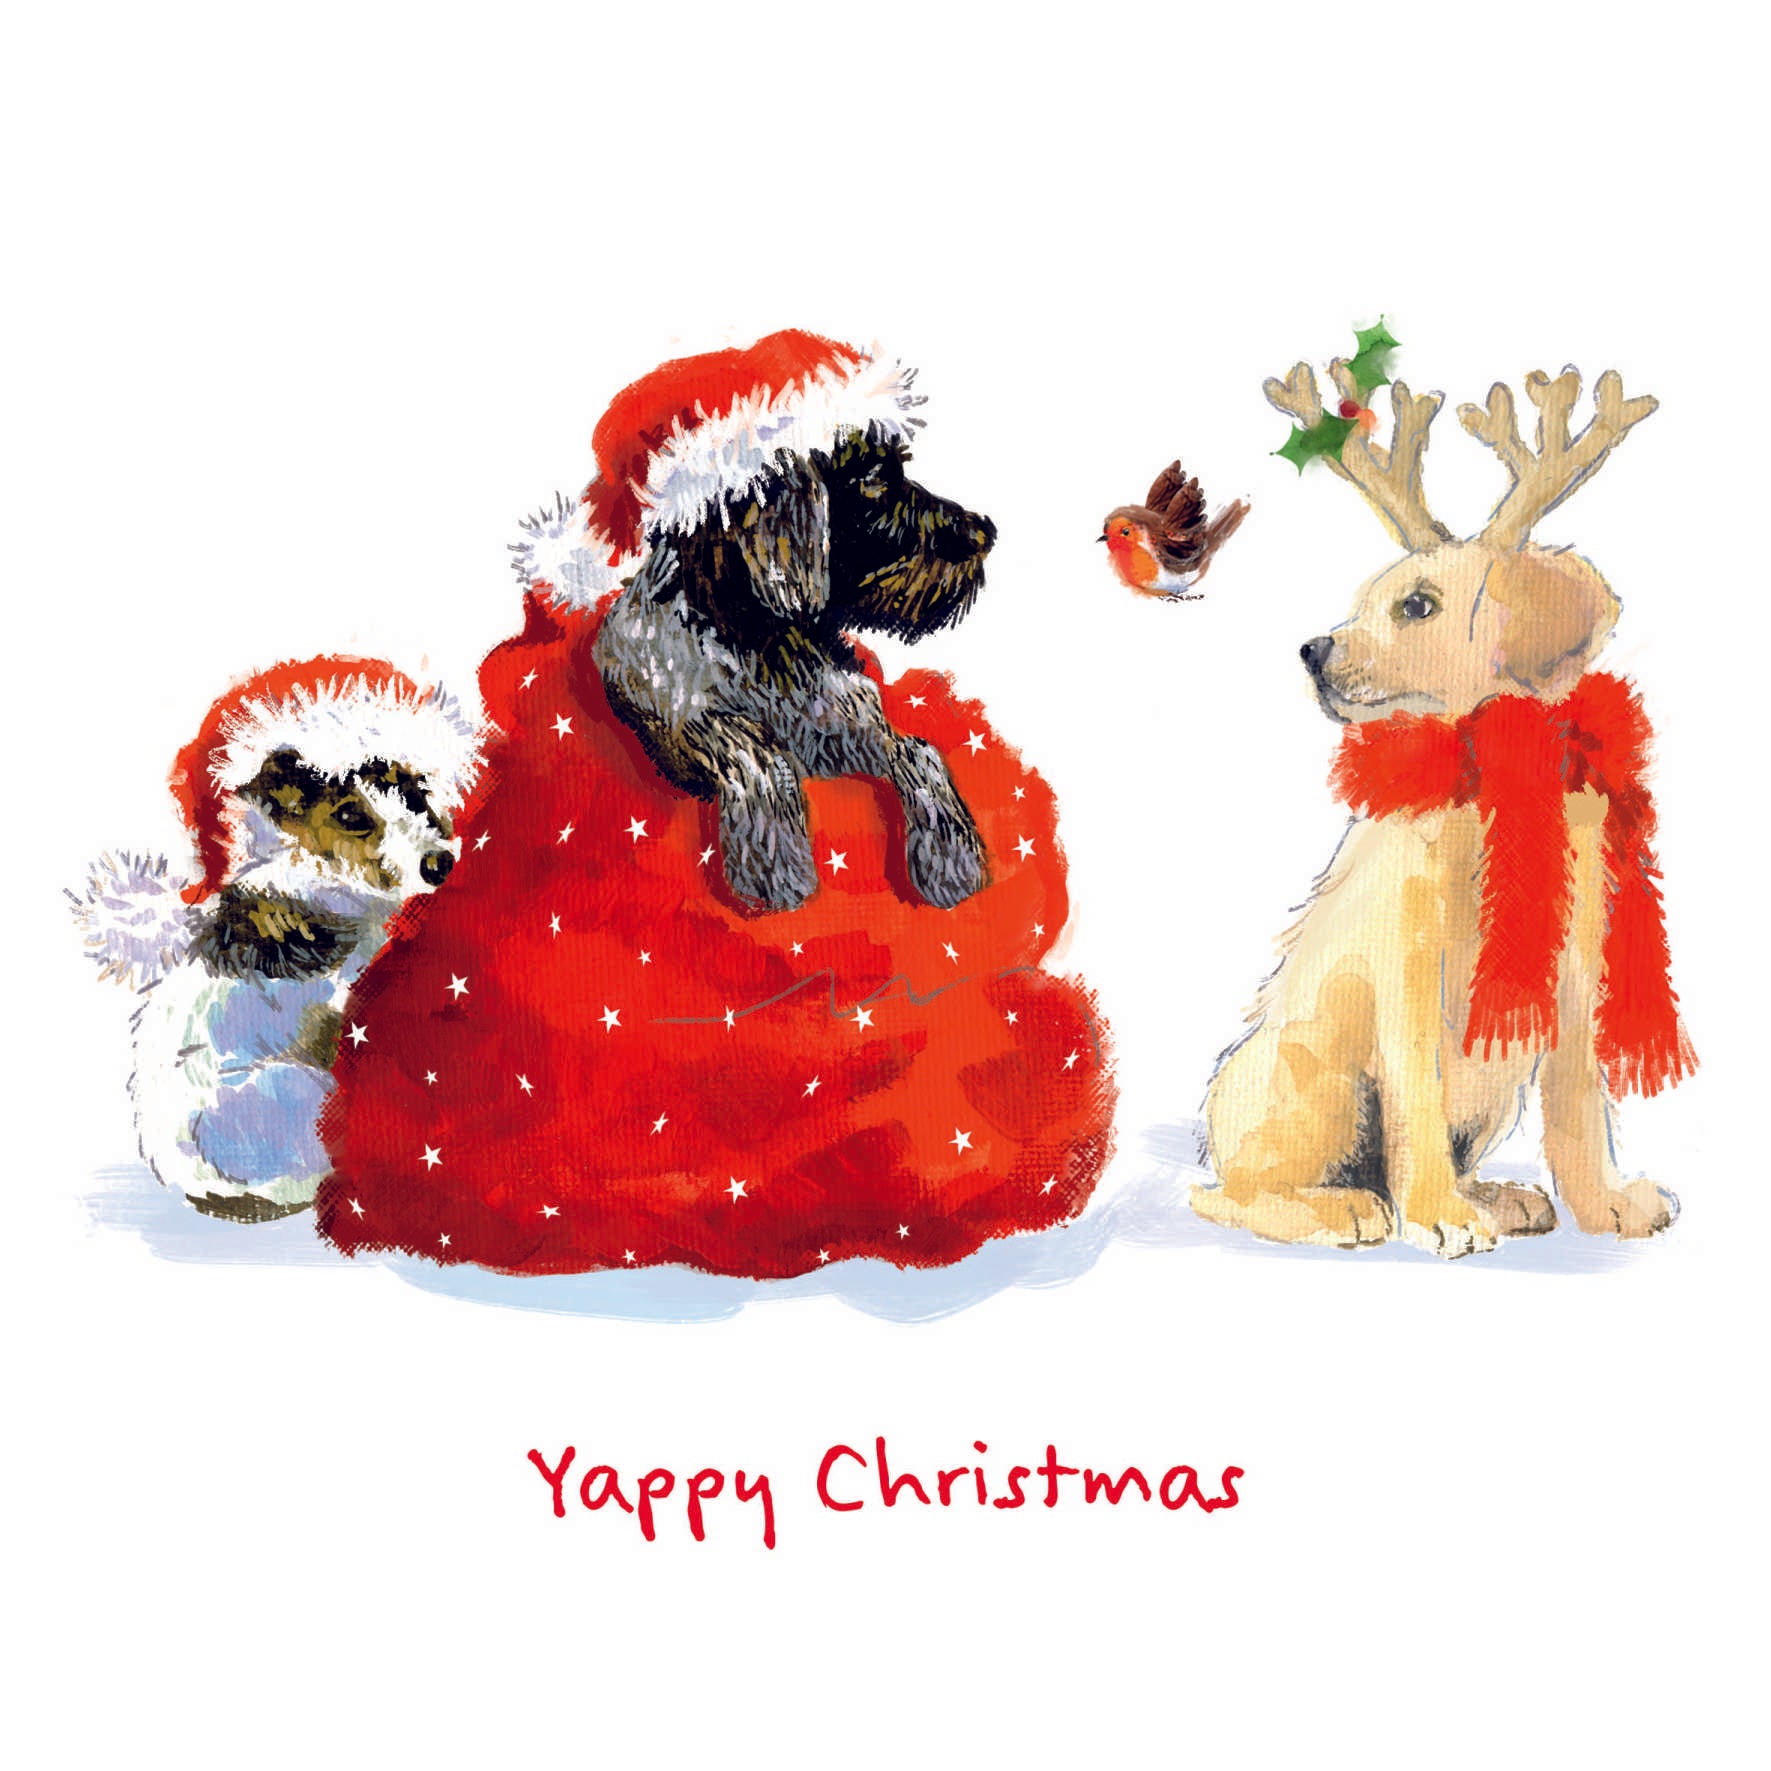 An illustrated design of three dogs and a robin in festive attire. One black puppy is poking out of a red sack. Red text at the bottom saying "Yappy Christmas" on a white background.